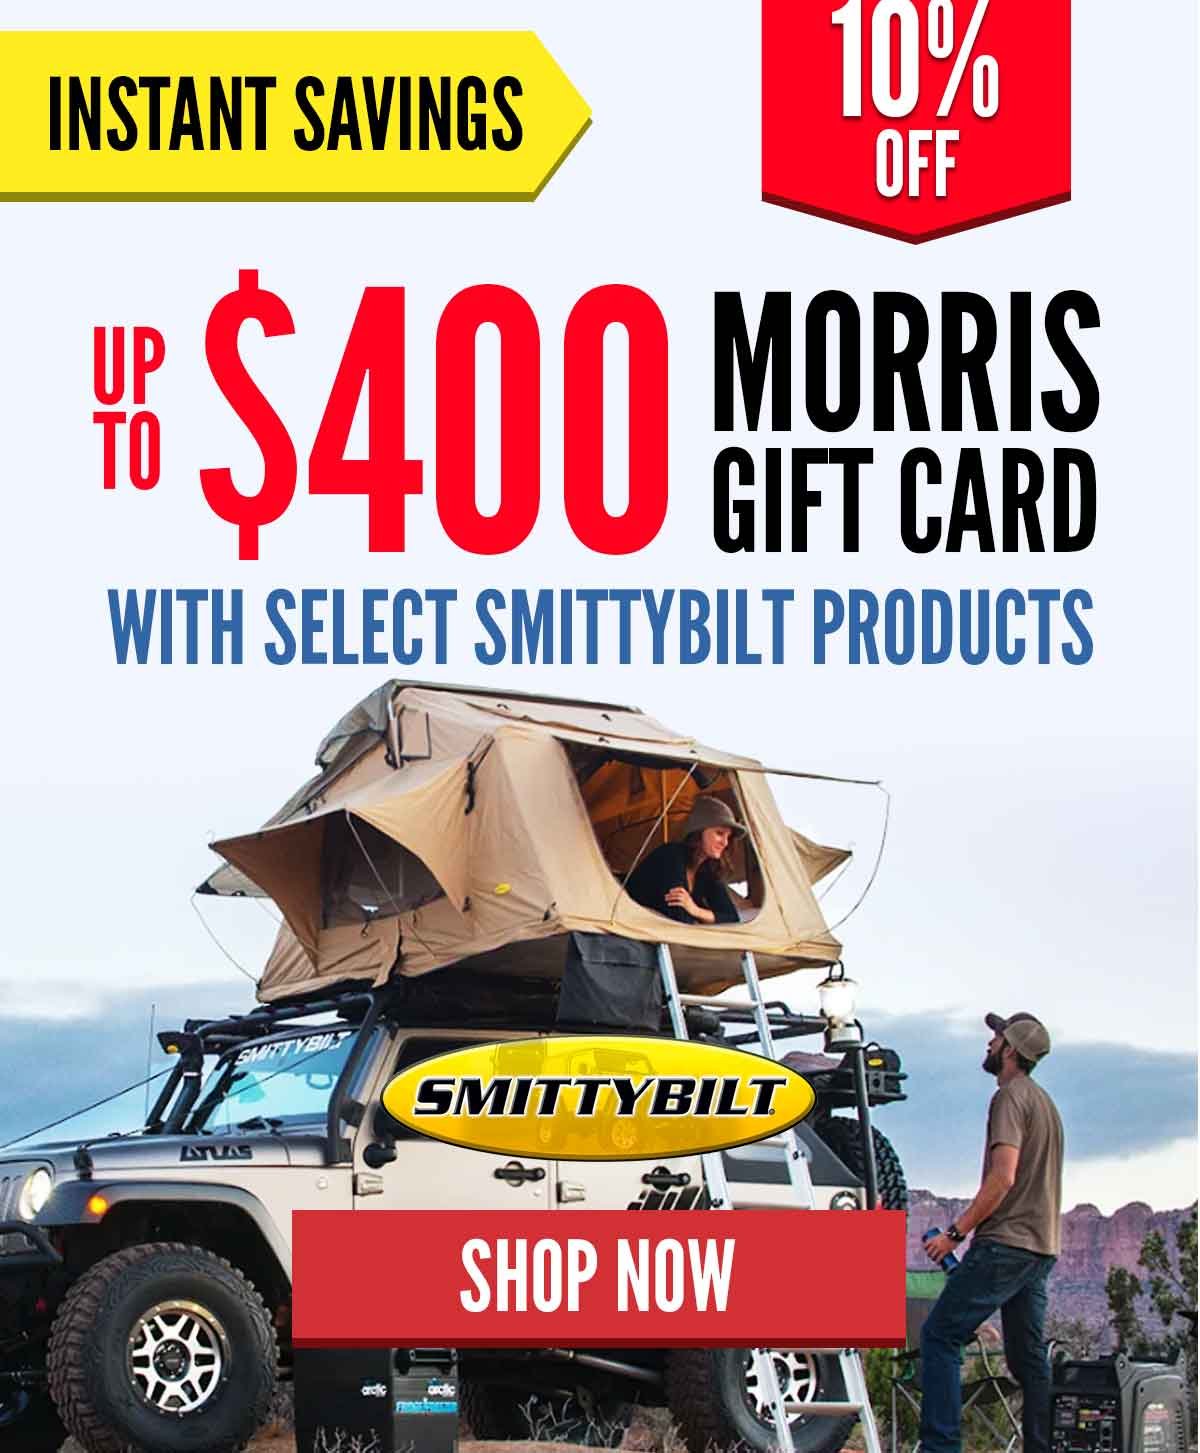 Up to $400 Morris Gift Card With Select Smittybilt Products